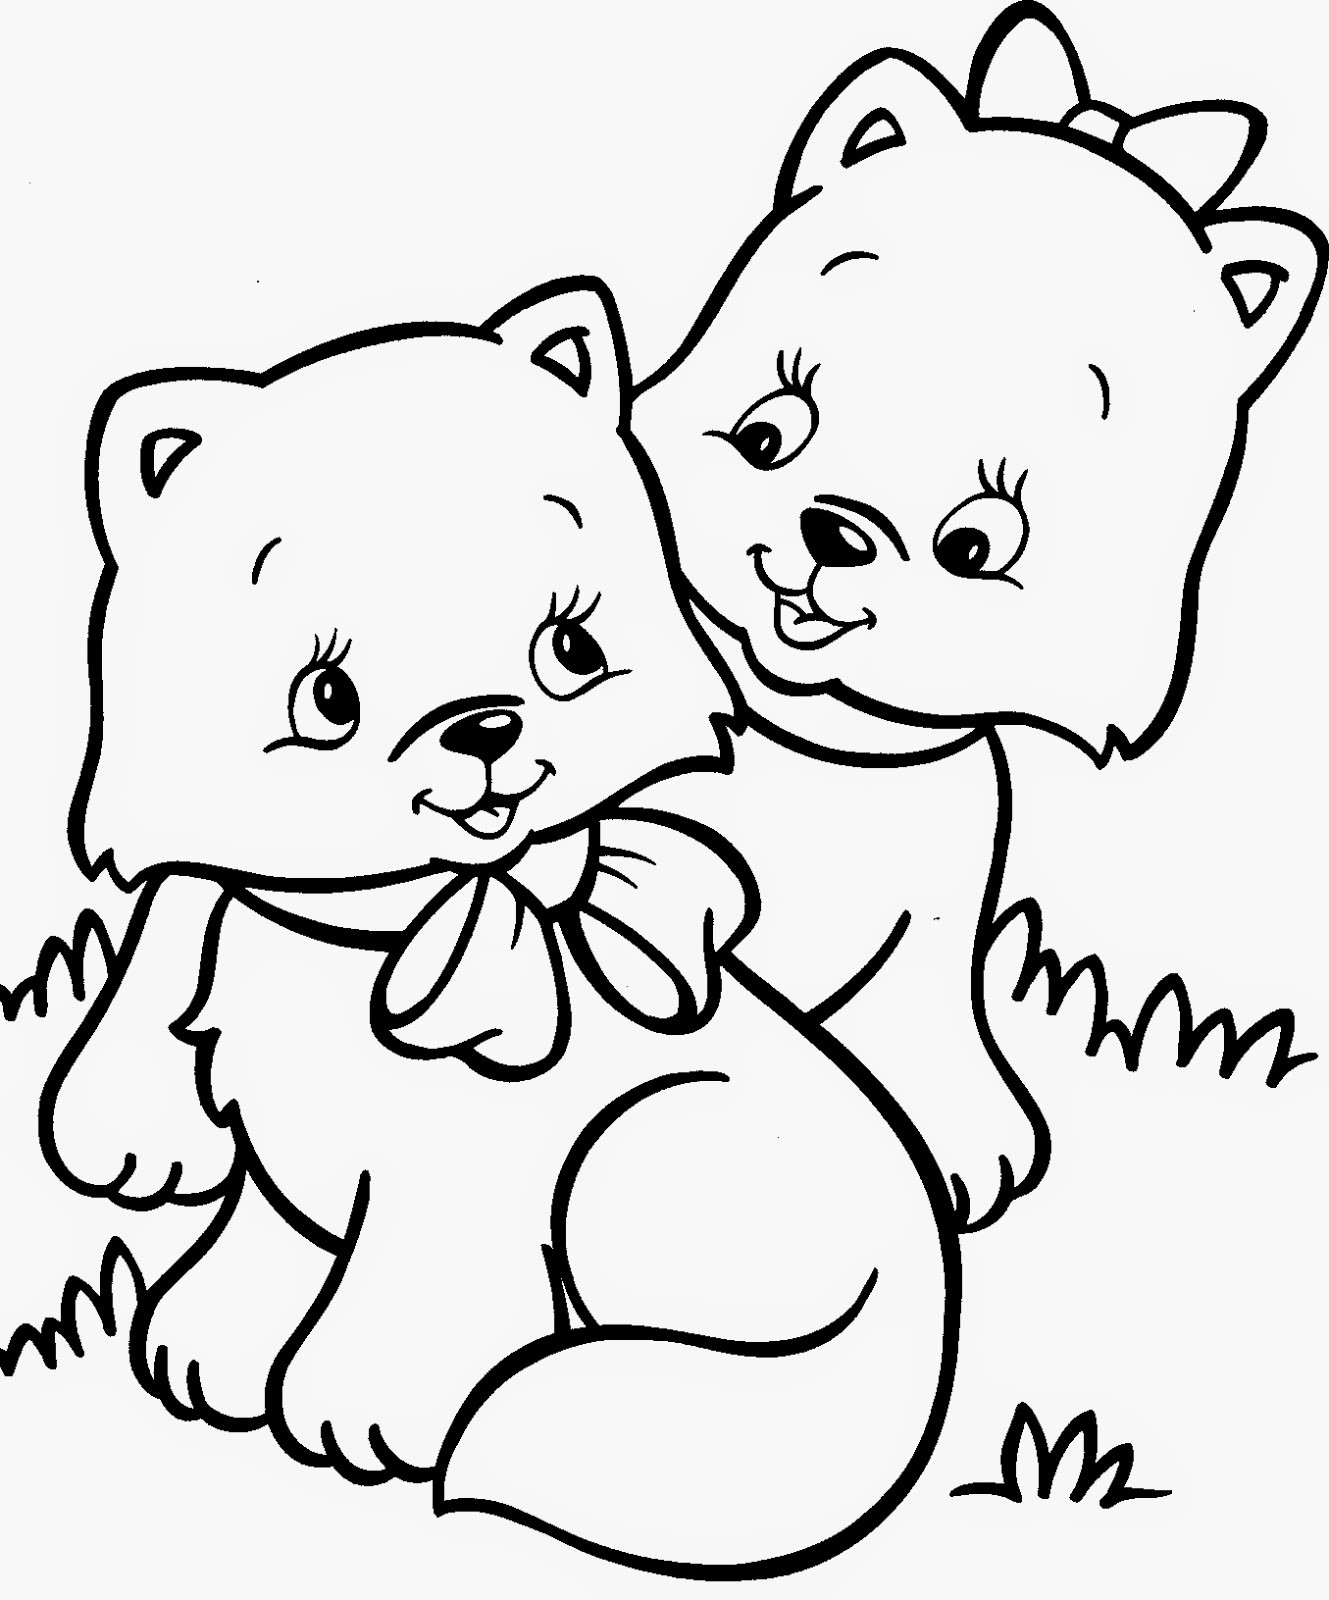 Kitten Coloring Pages For Kids
 Navishta Sketch sweet cute angle cats